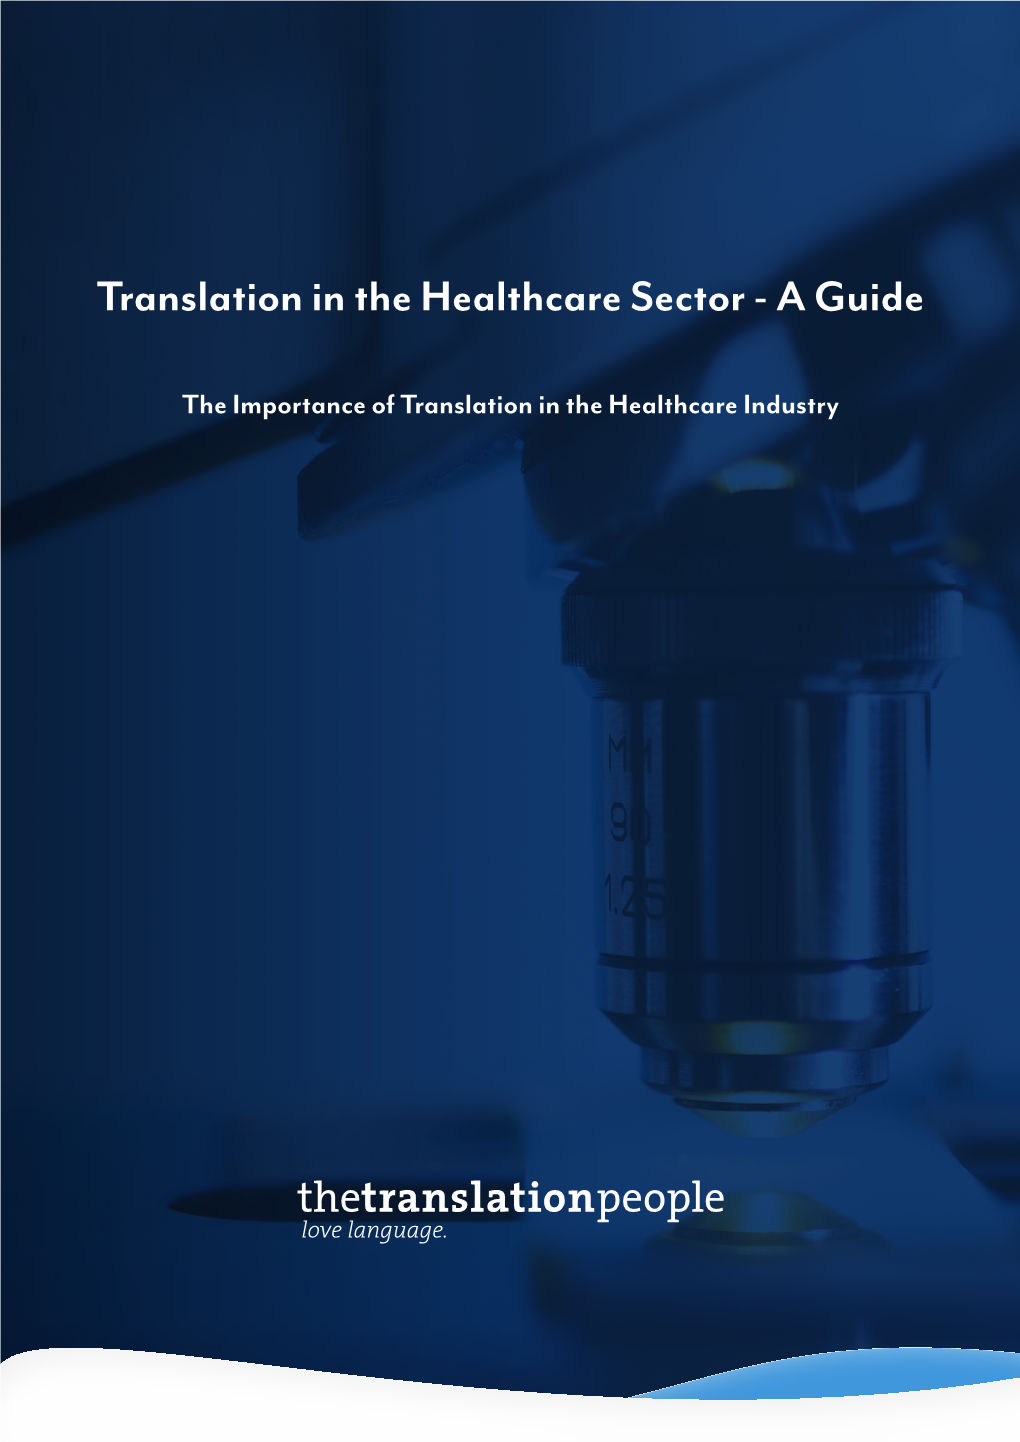 Translation in the Healthcare Sector - a Guide